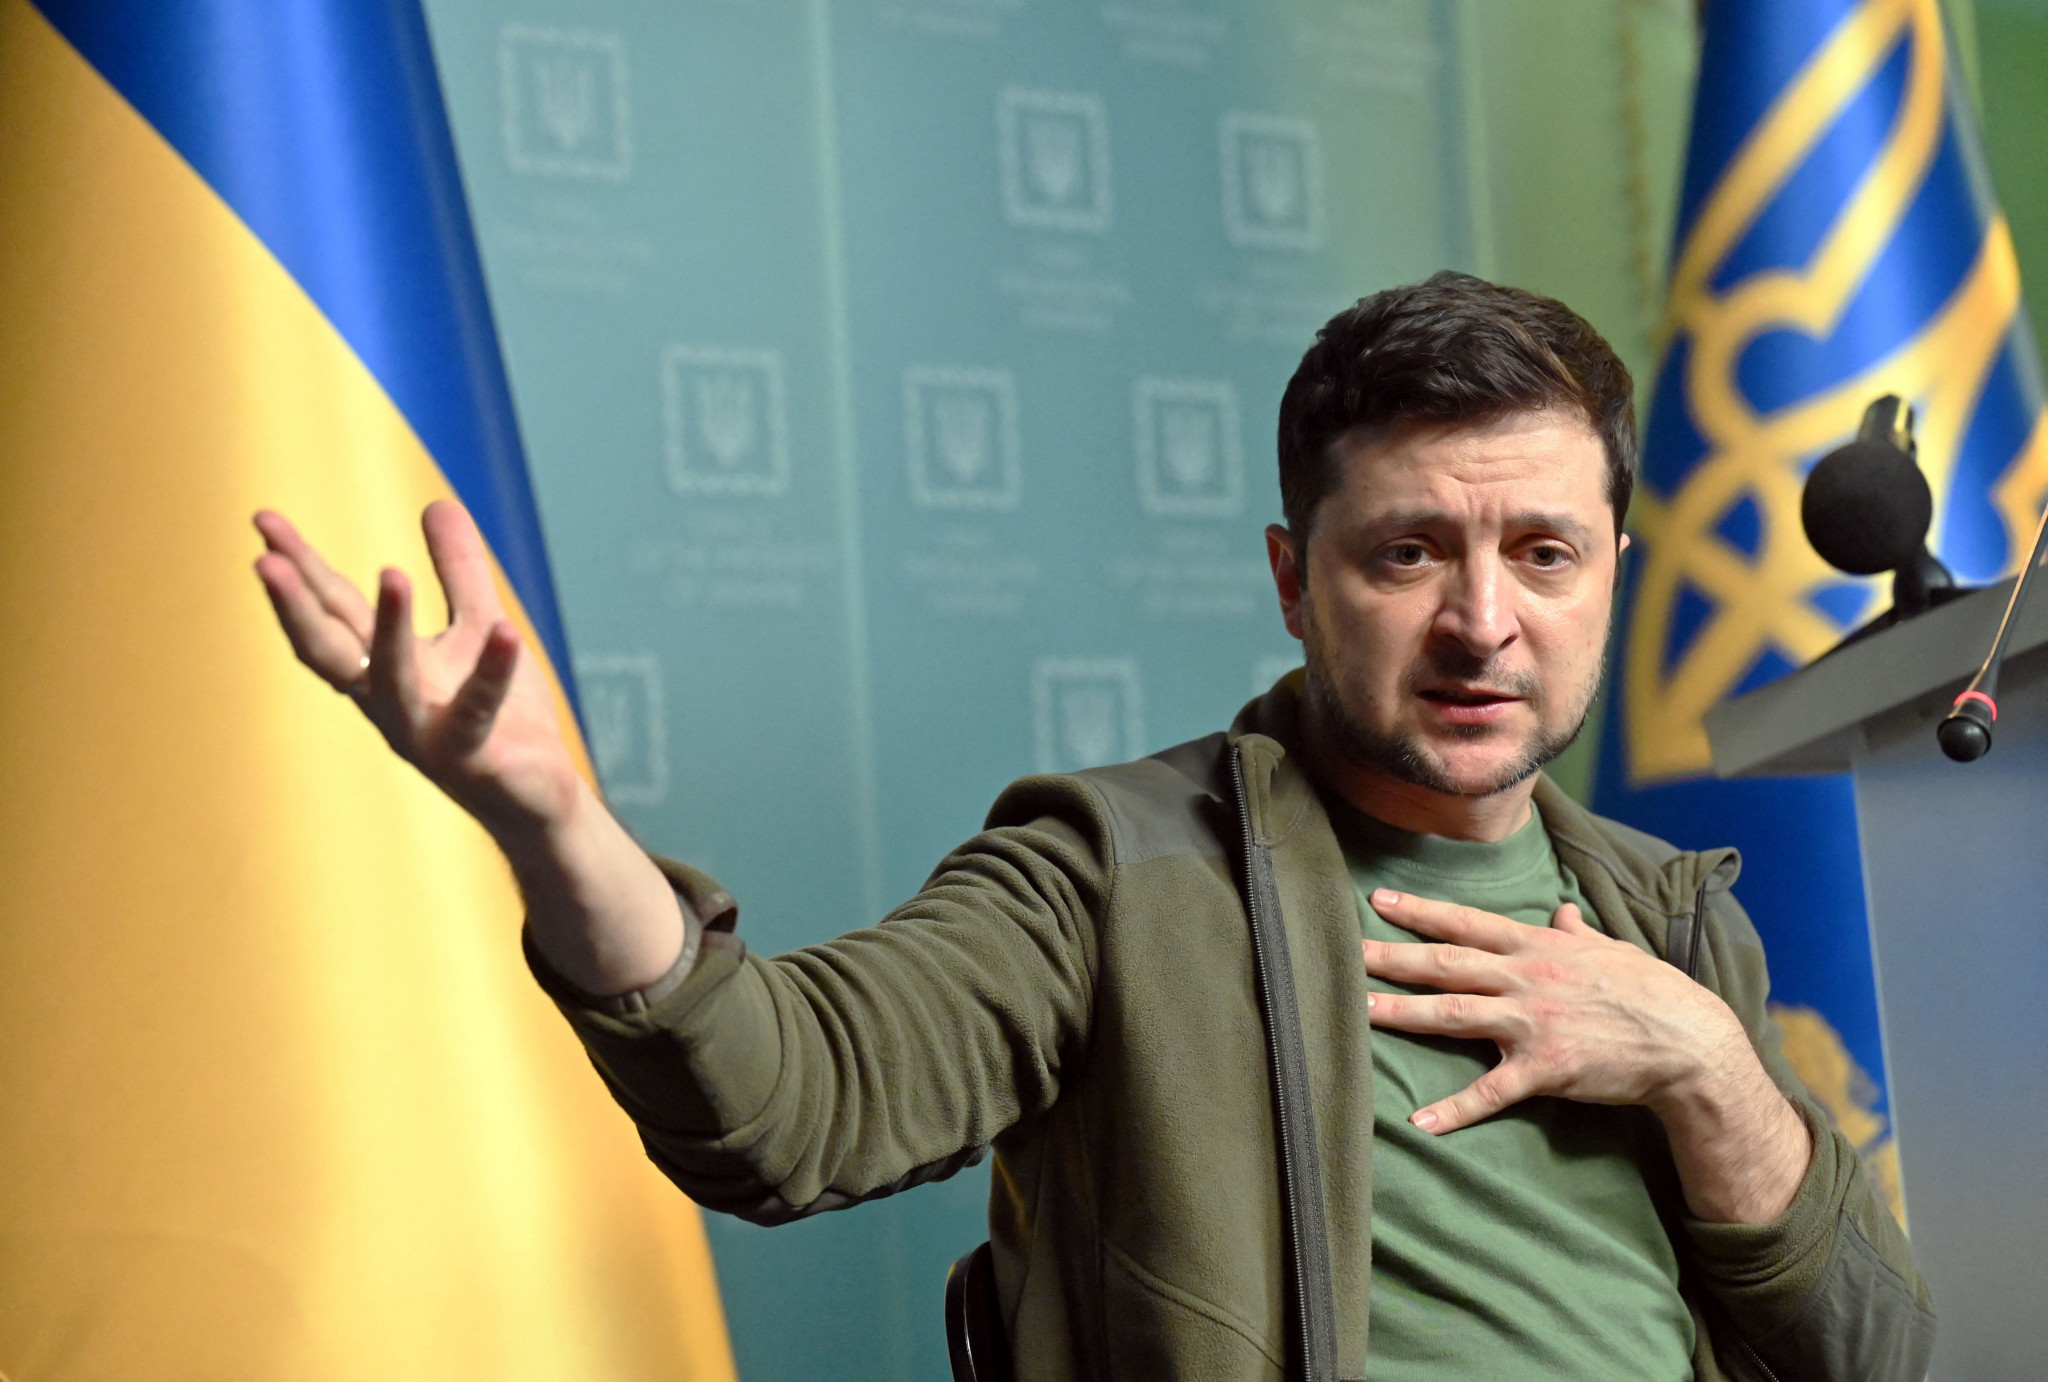 Ukraine Foreign Ministry release Zelenskyy video not shown at FIFA World Cup final